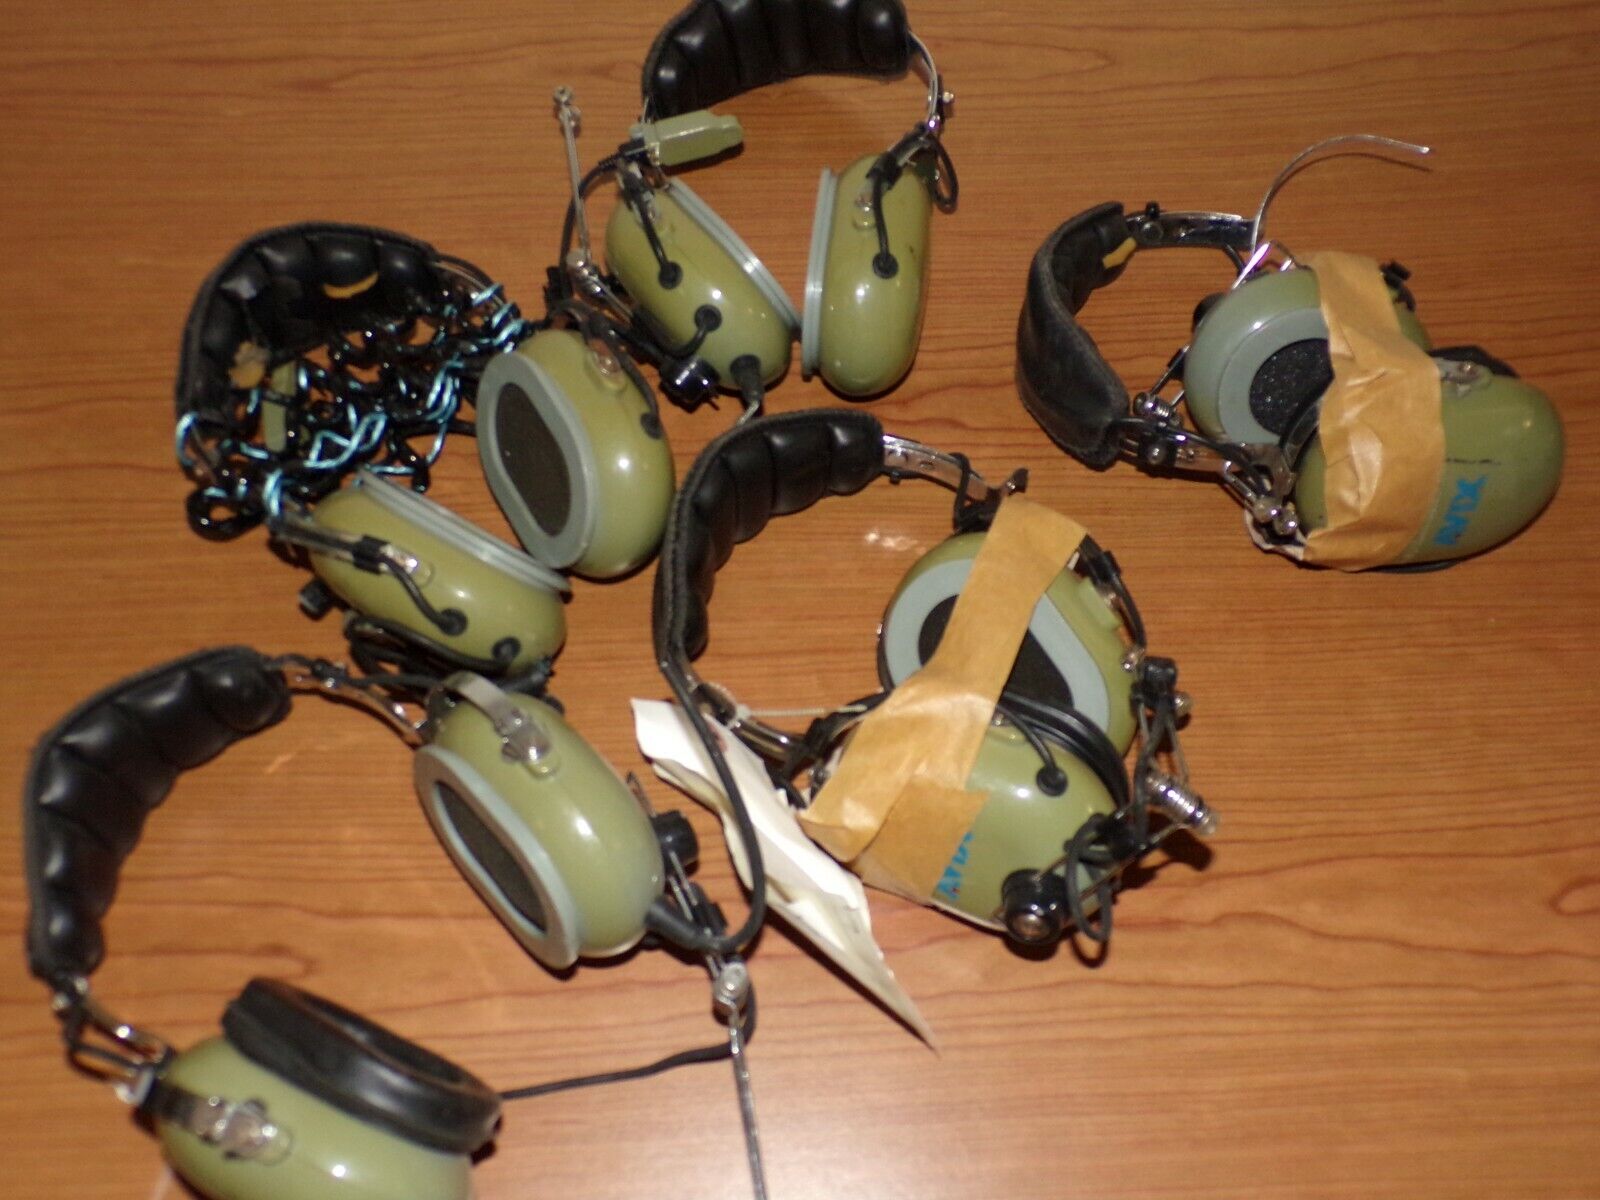 AX40H Aviation Headsets (for repair or display)